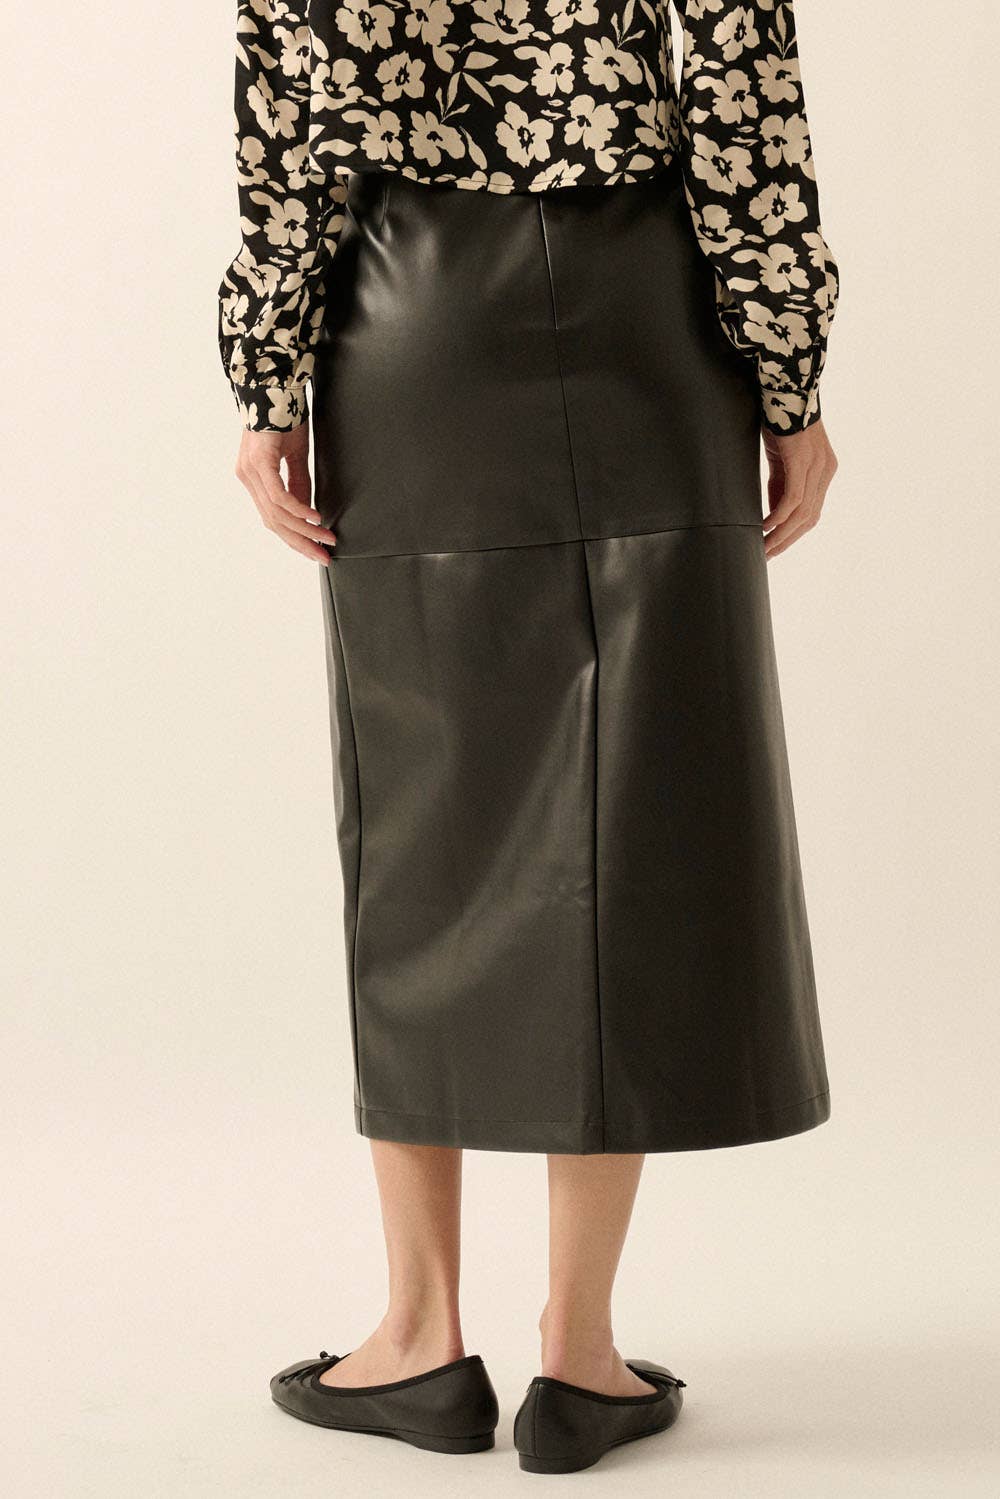 The Lenna faux leather skirt